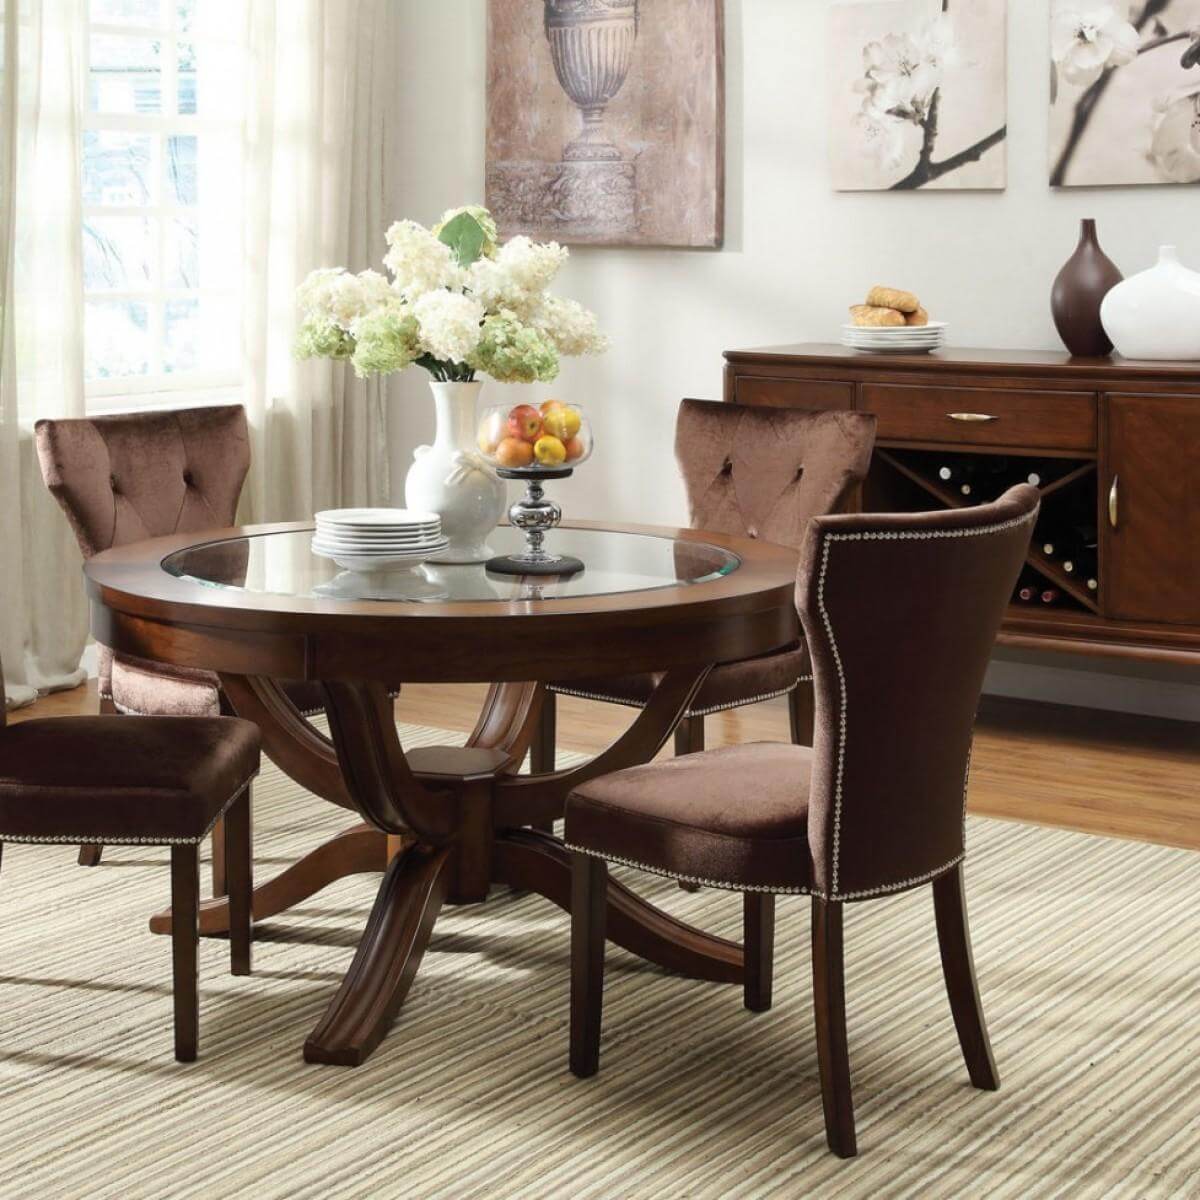 dining round table easiest coolest most tables glass source